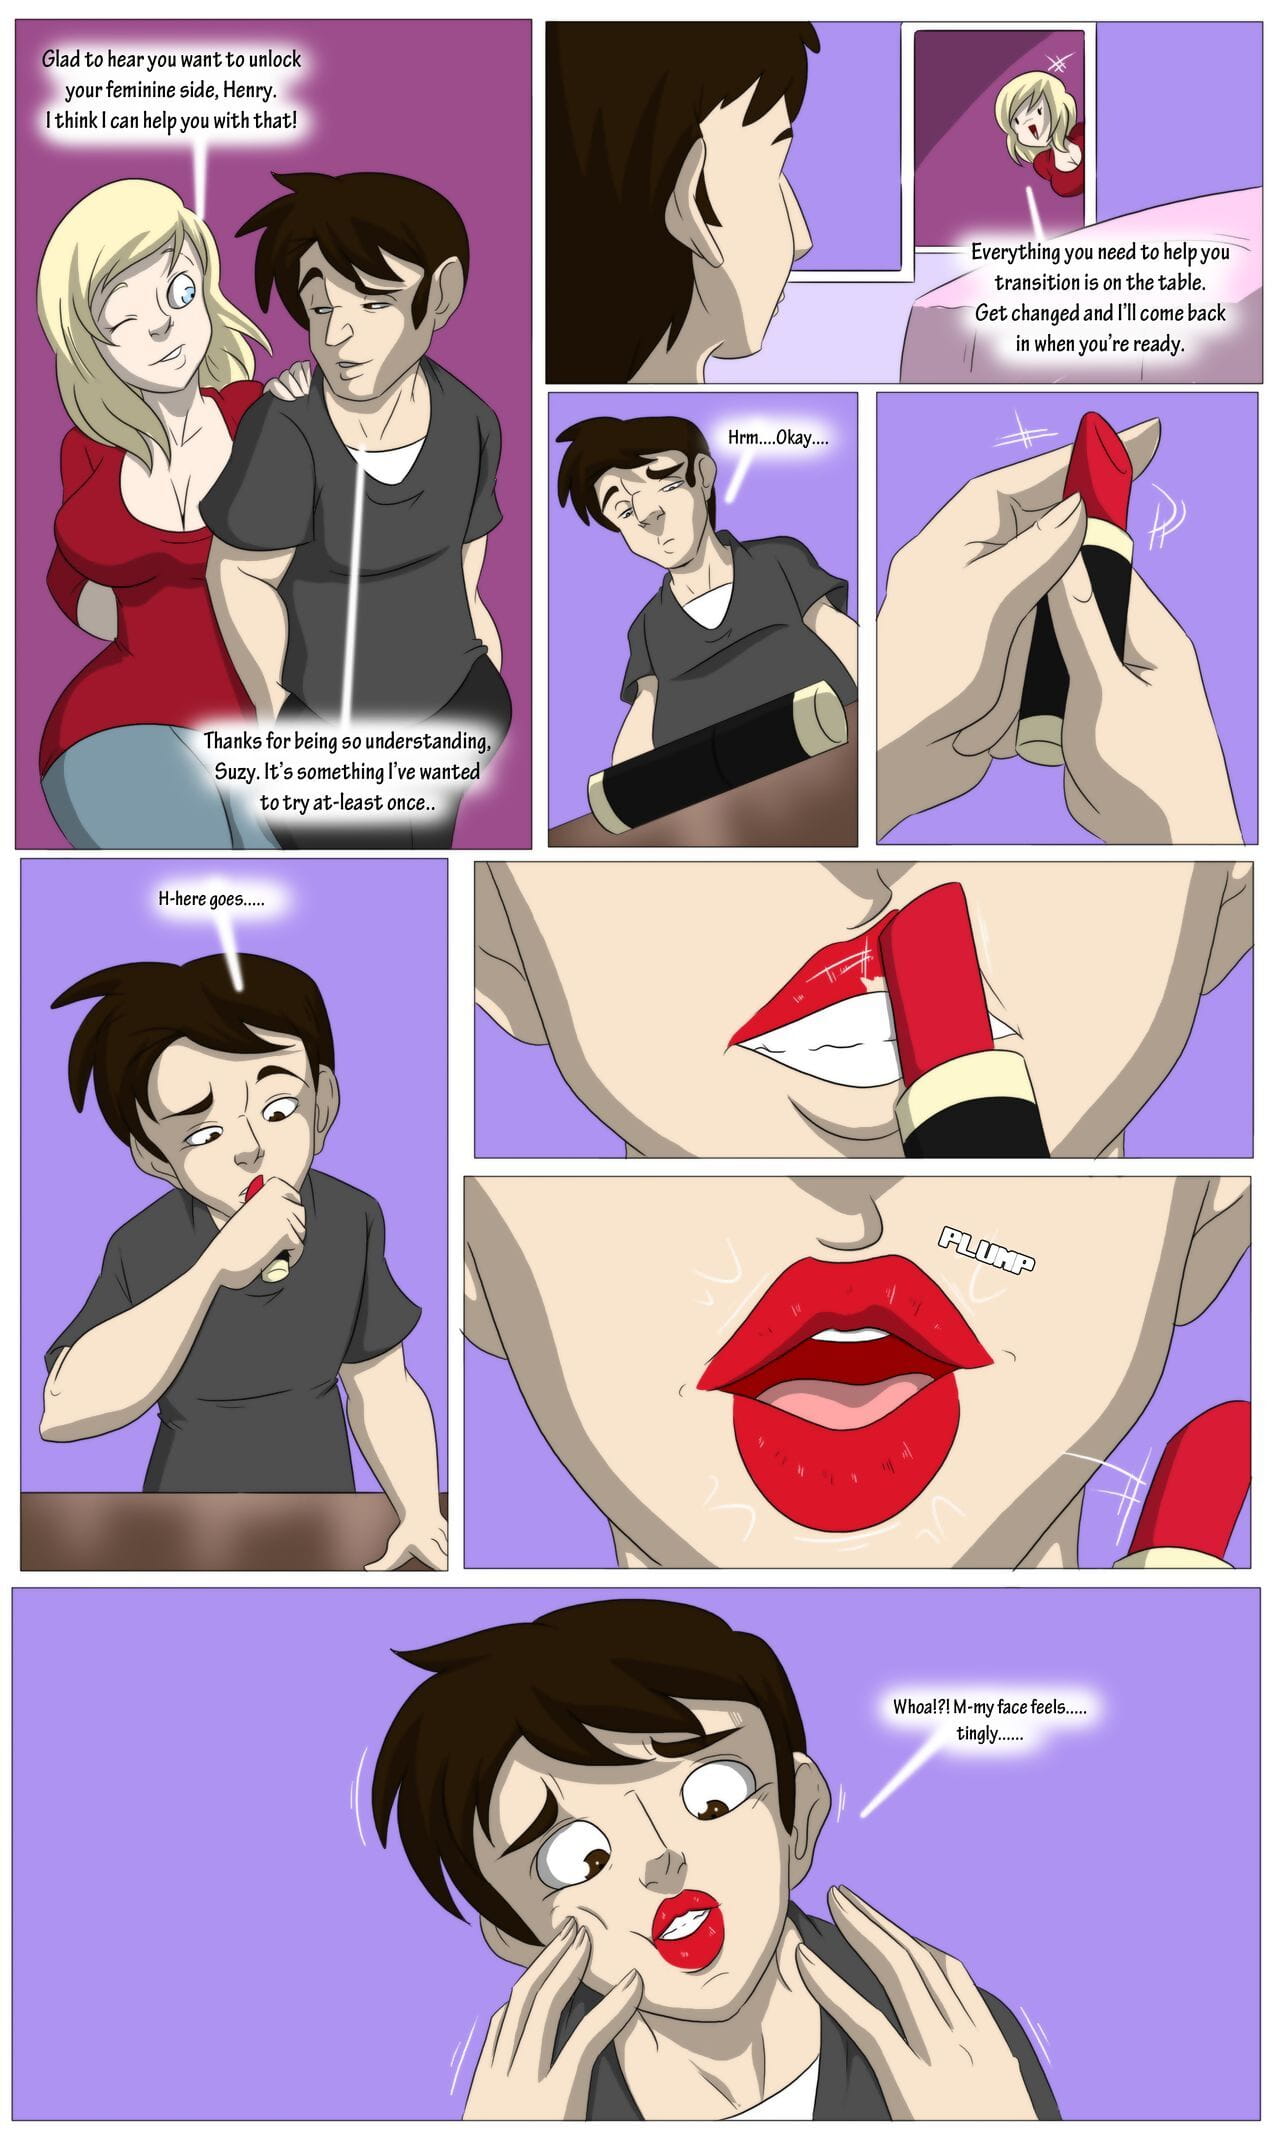 tfsubmissions indulgere makeover page 1